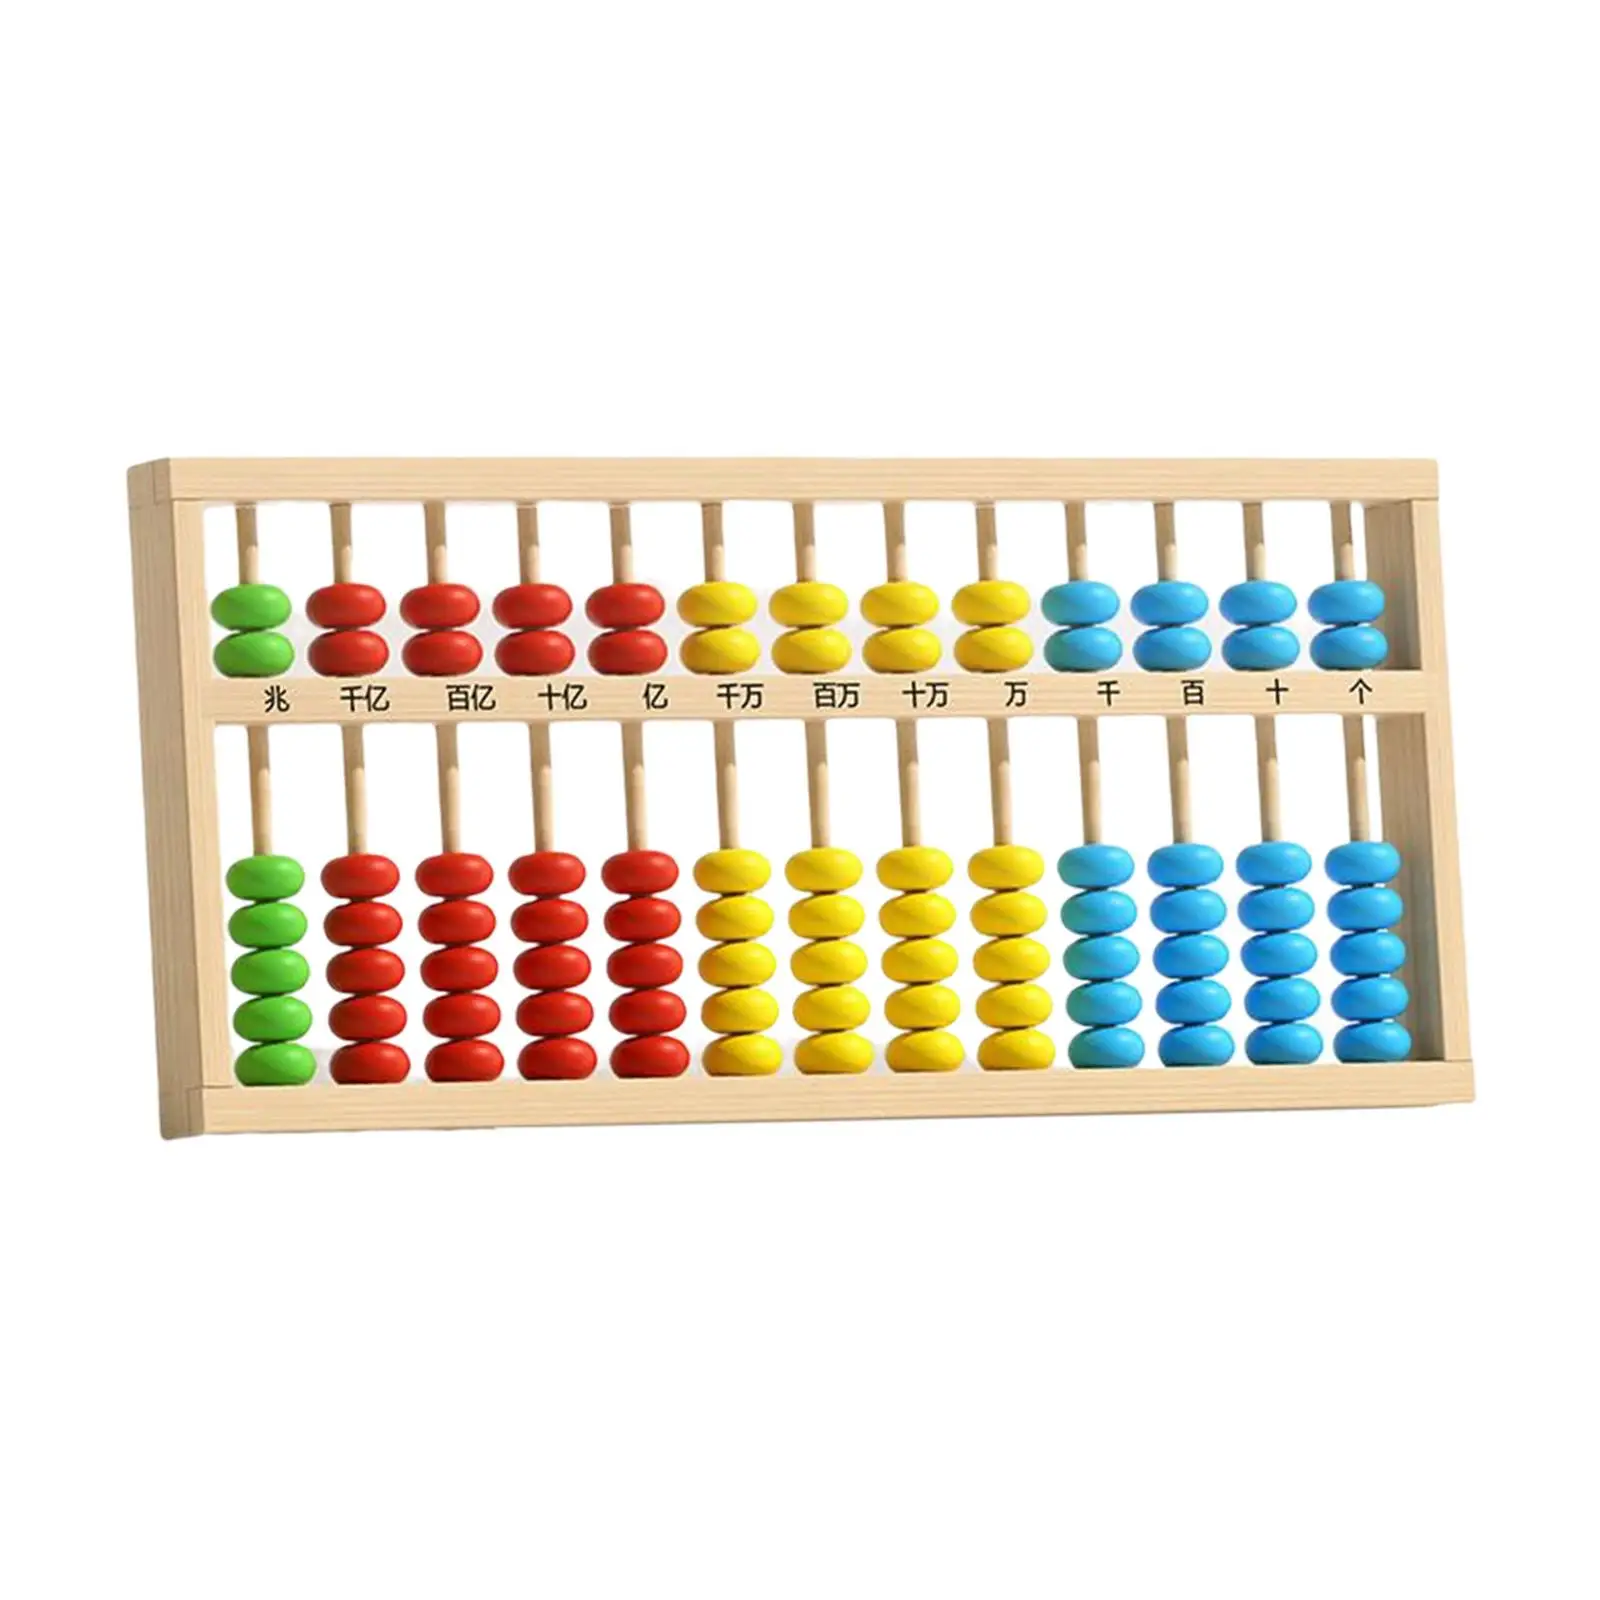 Abacus Educational Toy Counting Math Manipulatives Mathematics Toy for Preschool